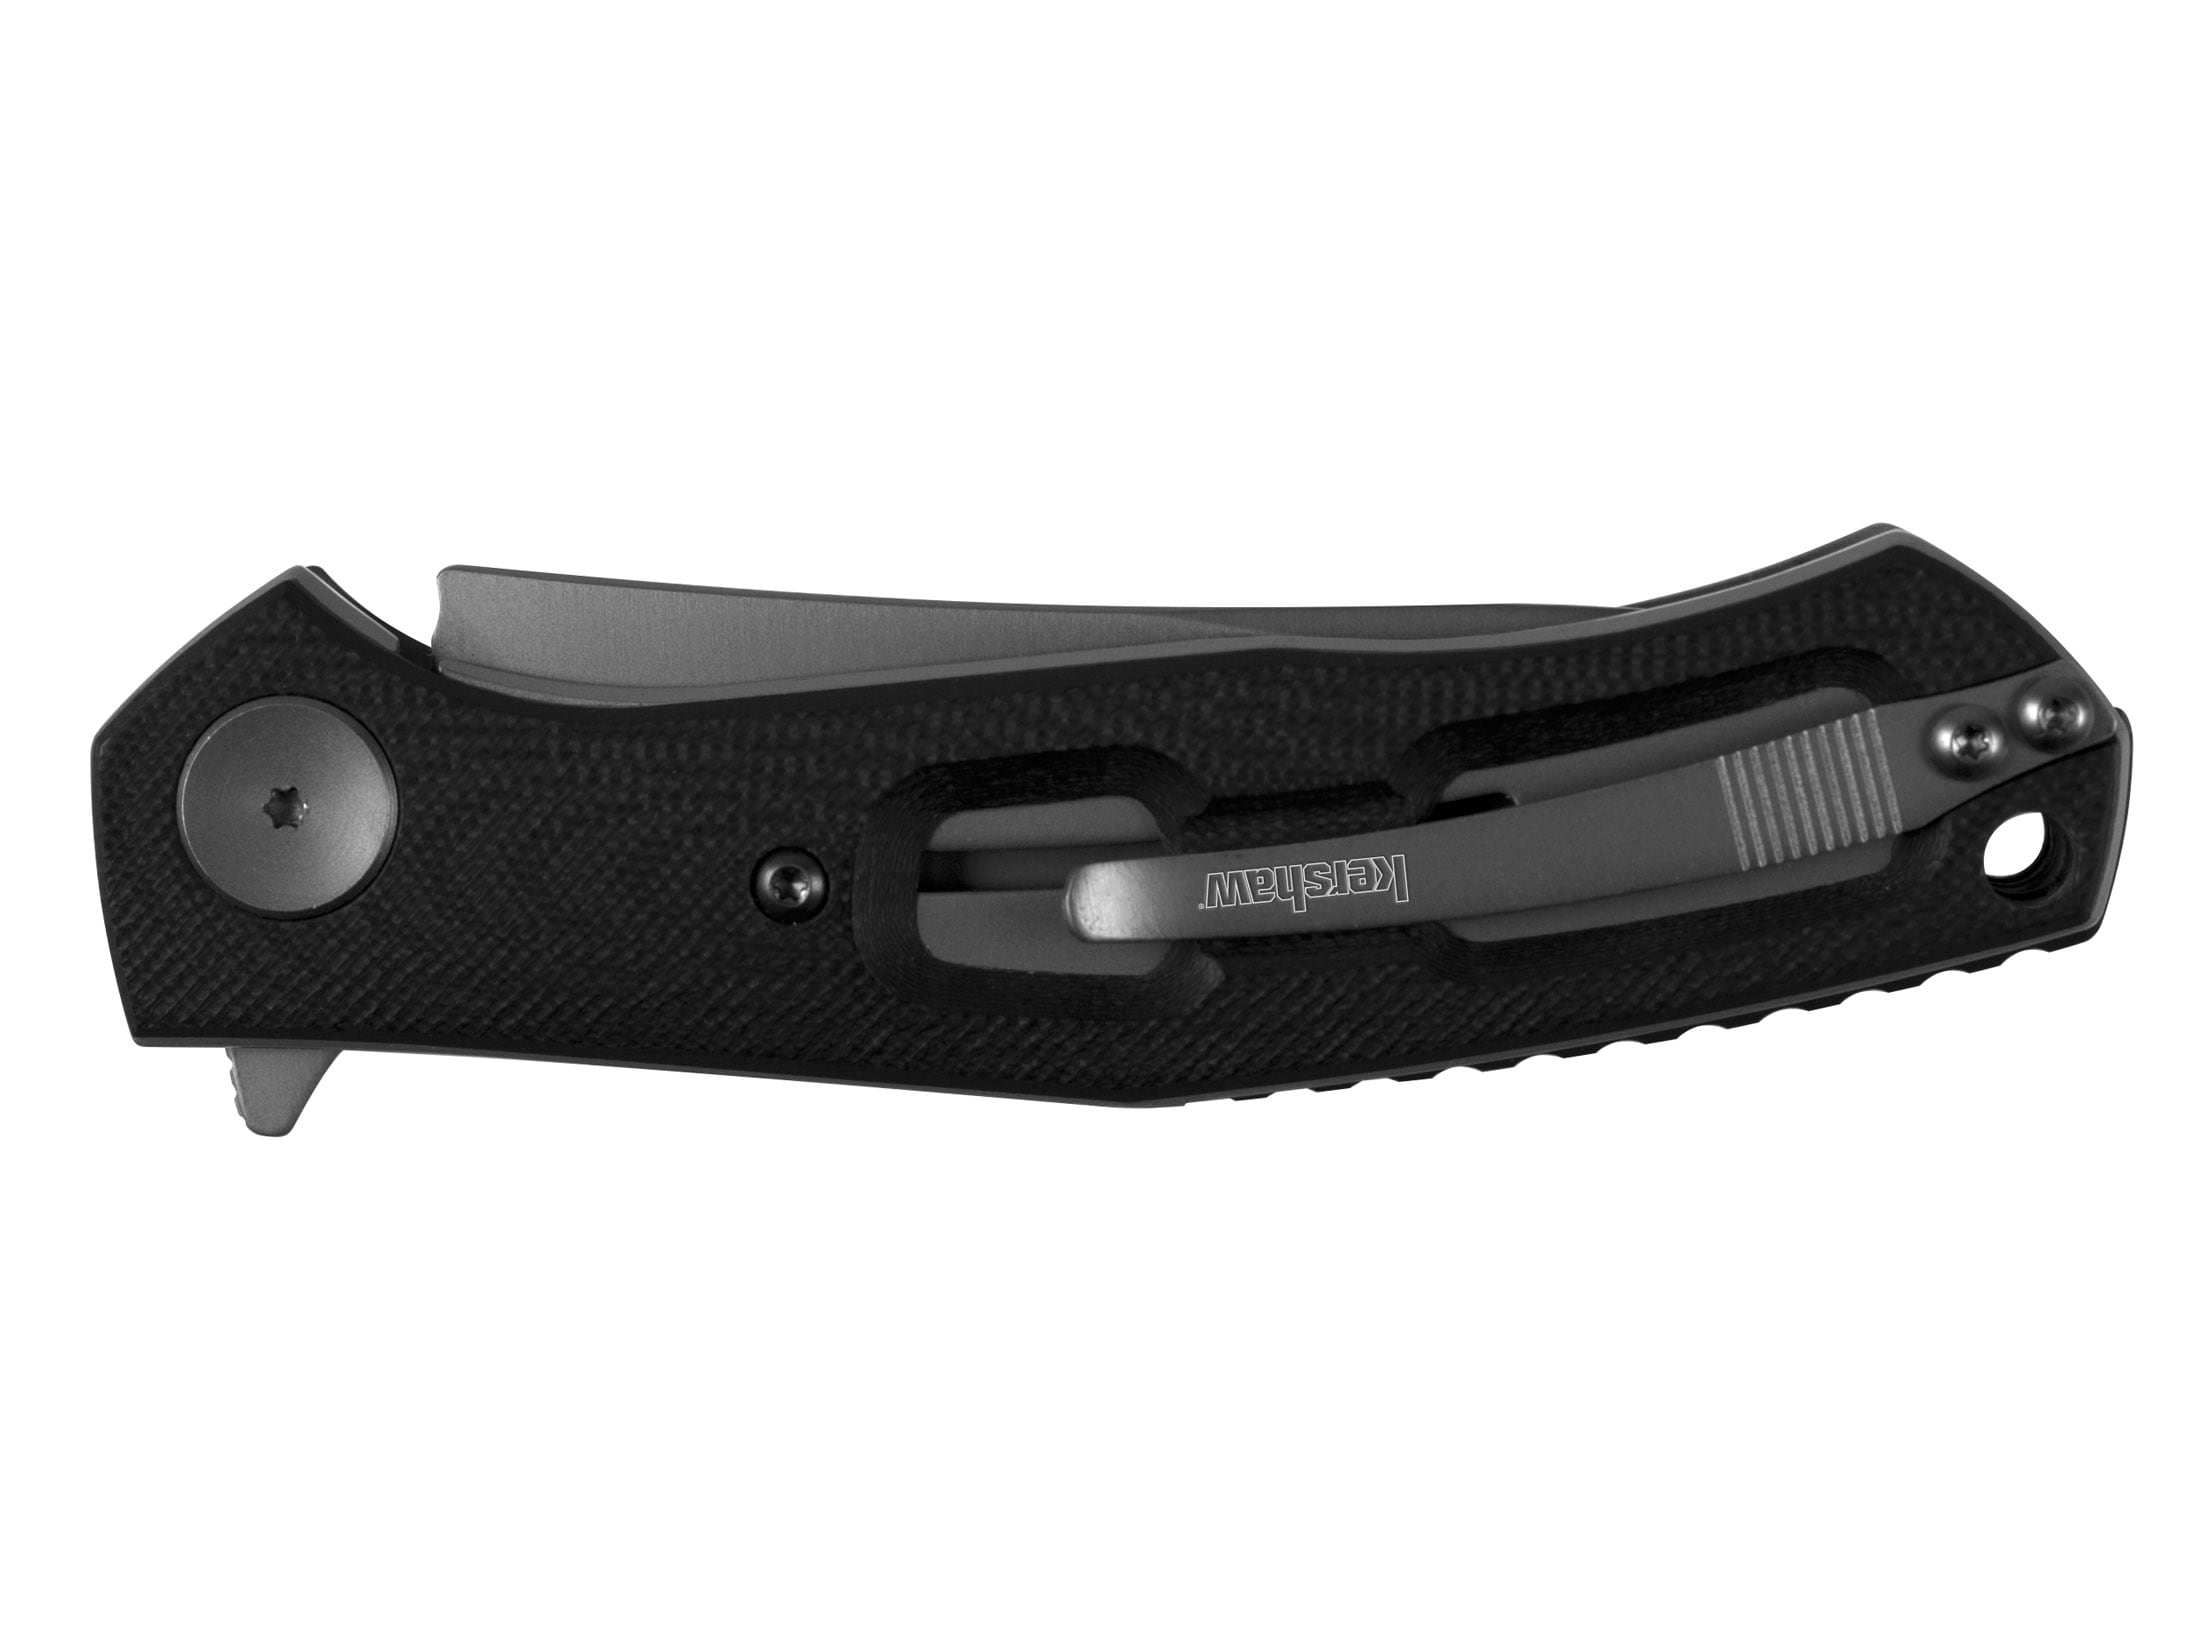 Kershaw Concierge Folding Knfie 3.5″ Drop Point 8Cr13MoV Stainless Steel Blade G-10 Handle Black For Sale